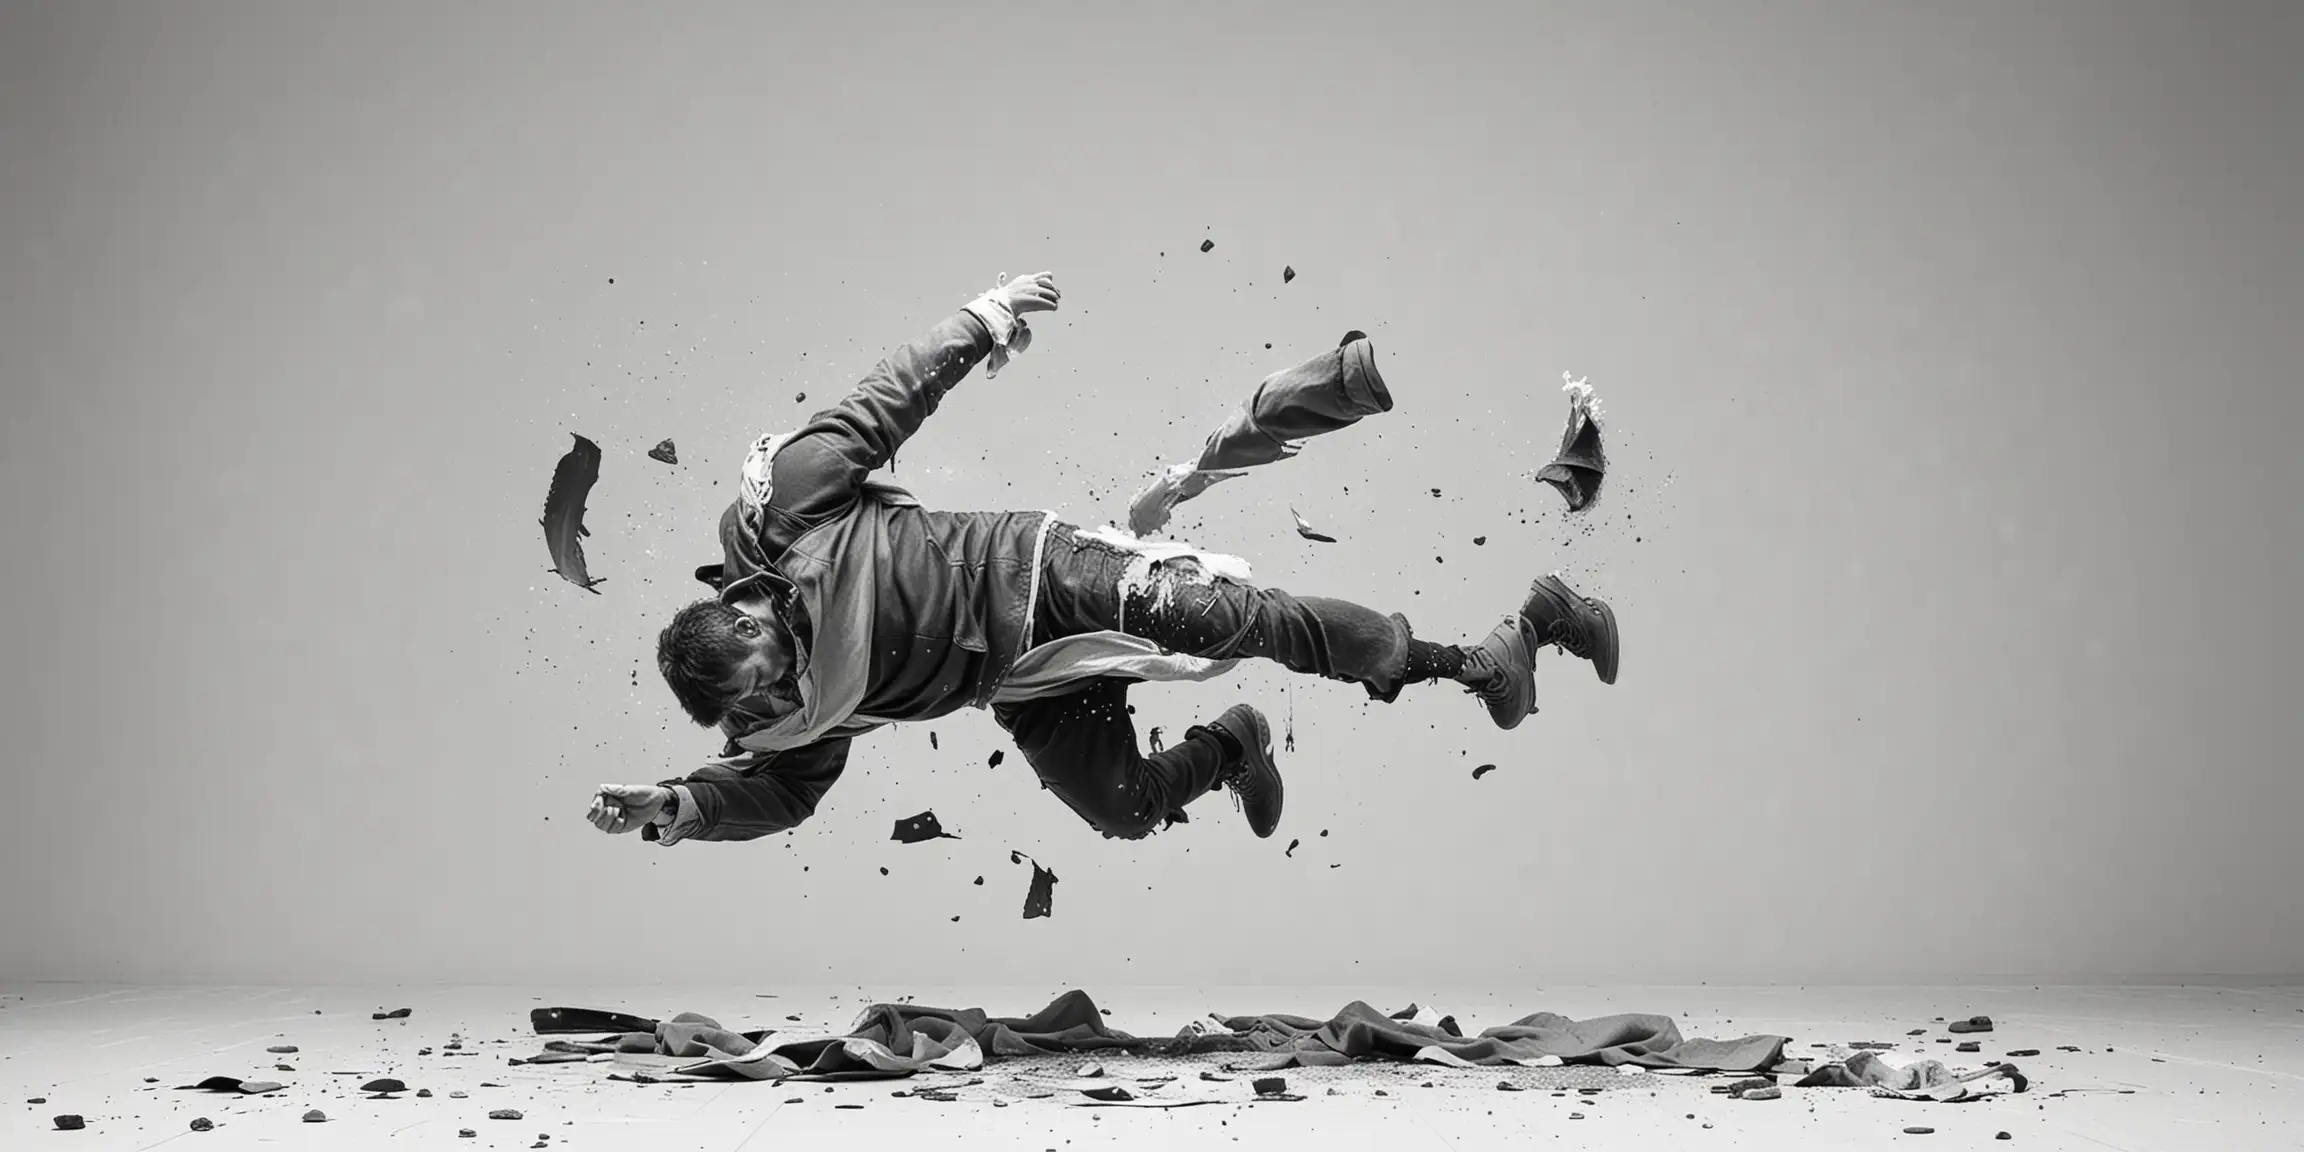 Dramatic Black and White Portrait of a Falling Man in Torn Clothes